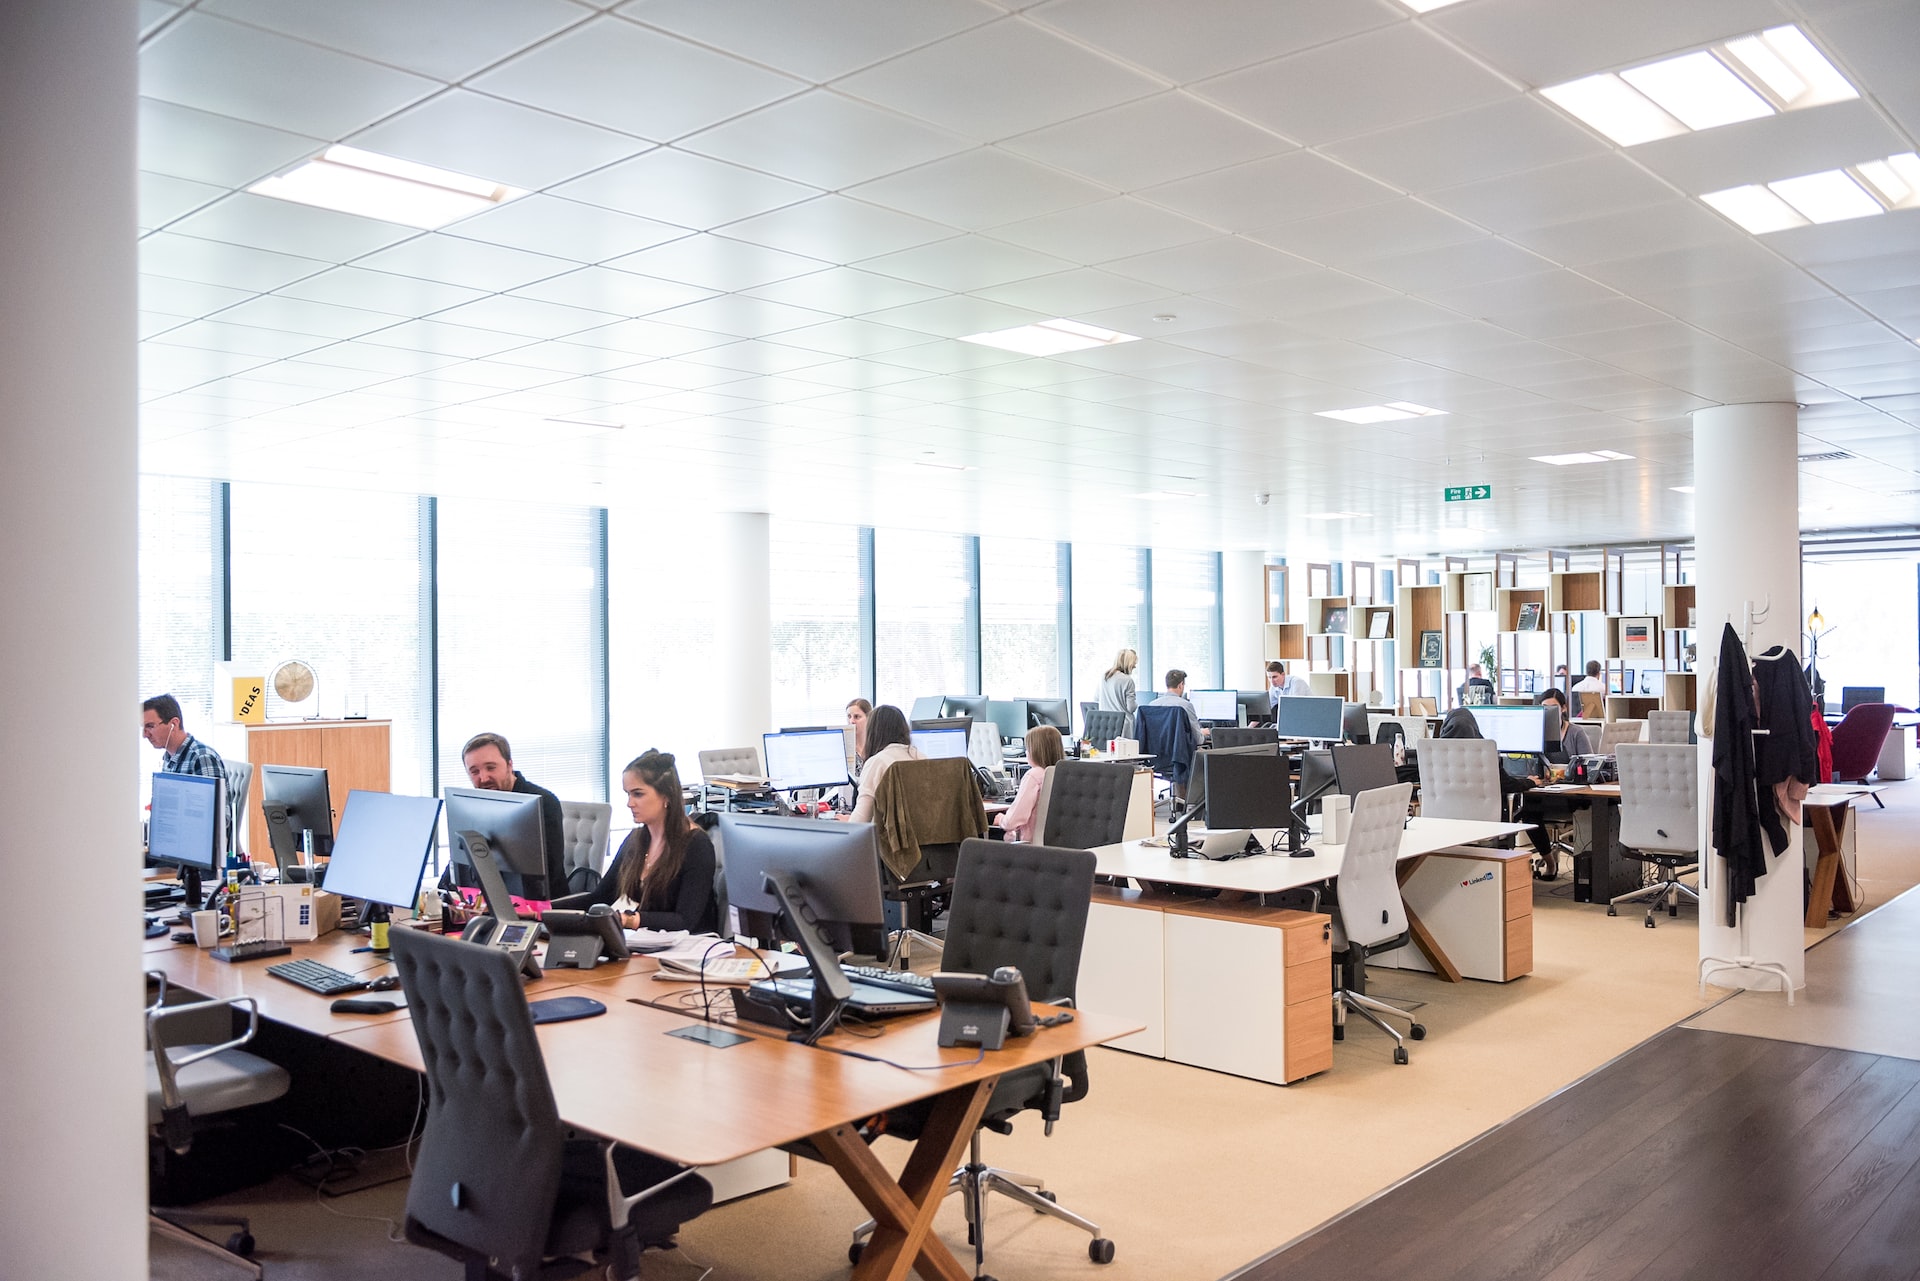 British Council for Offices Defines Standards for the Net-Zero Workplace